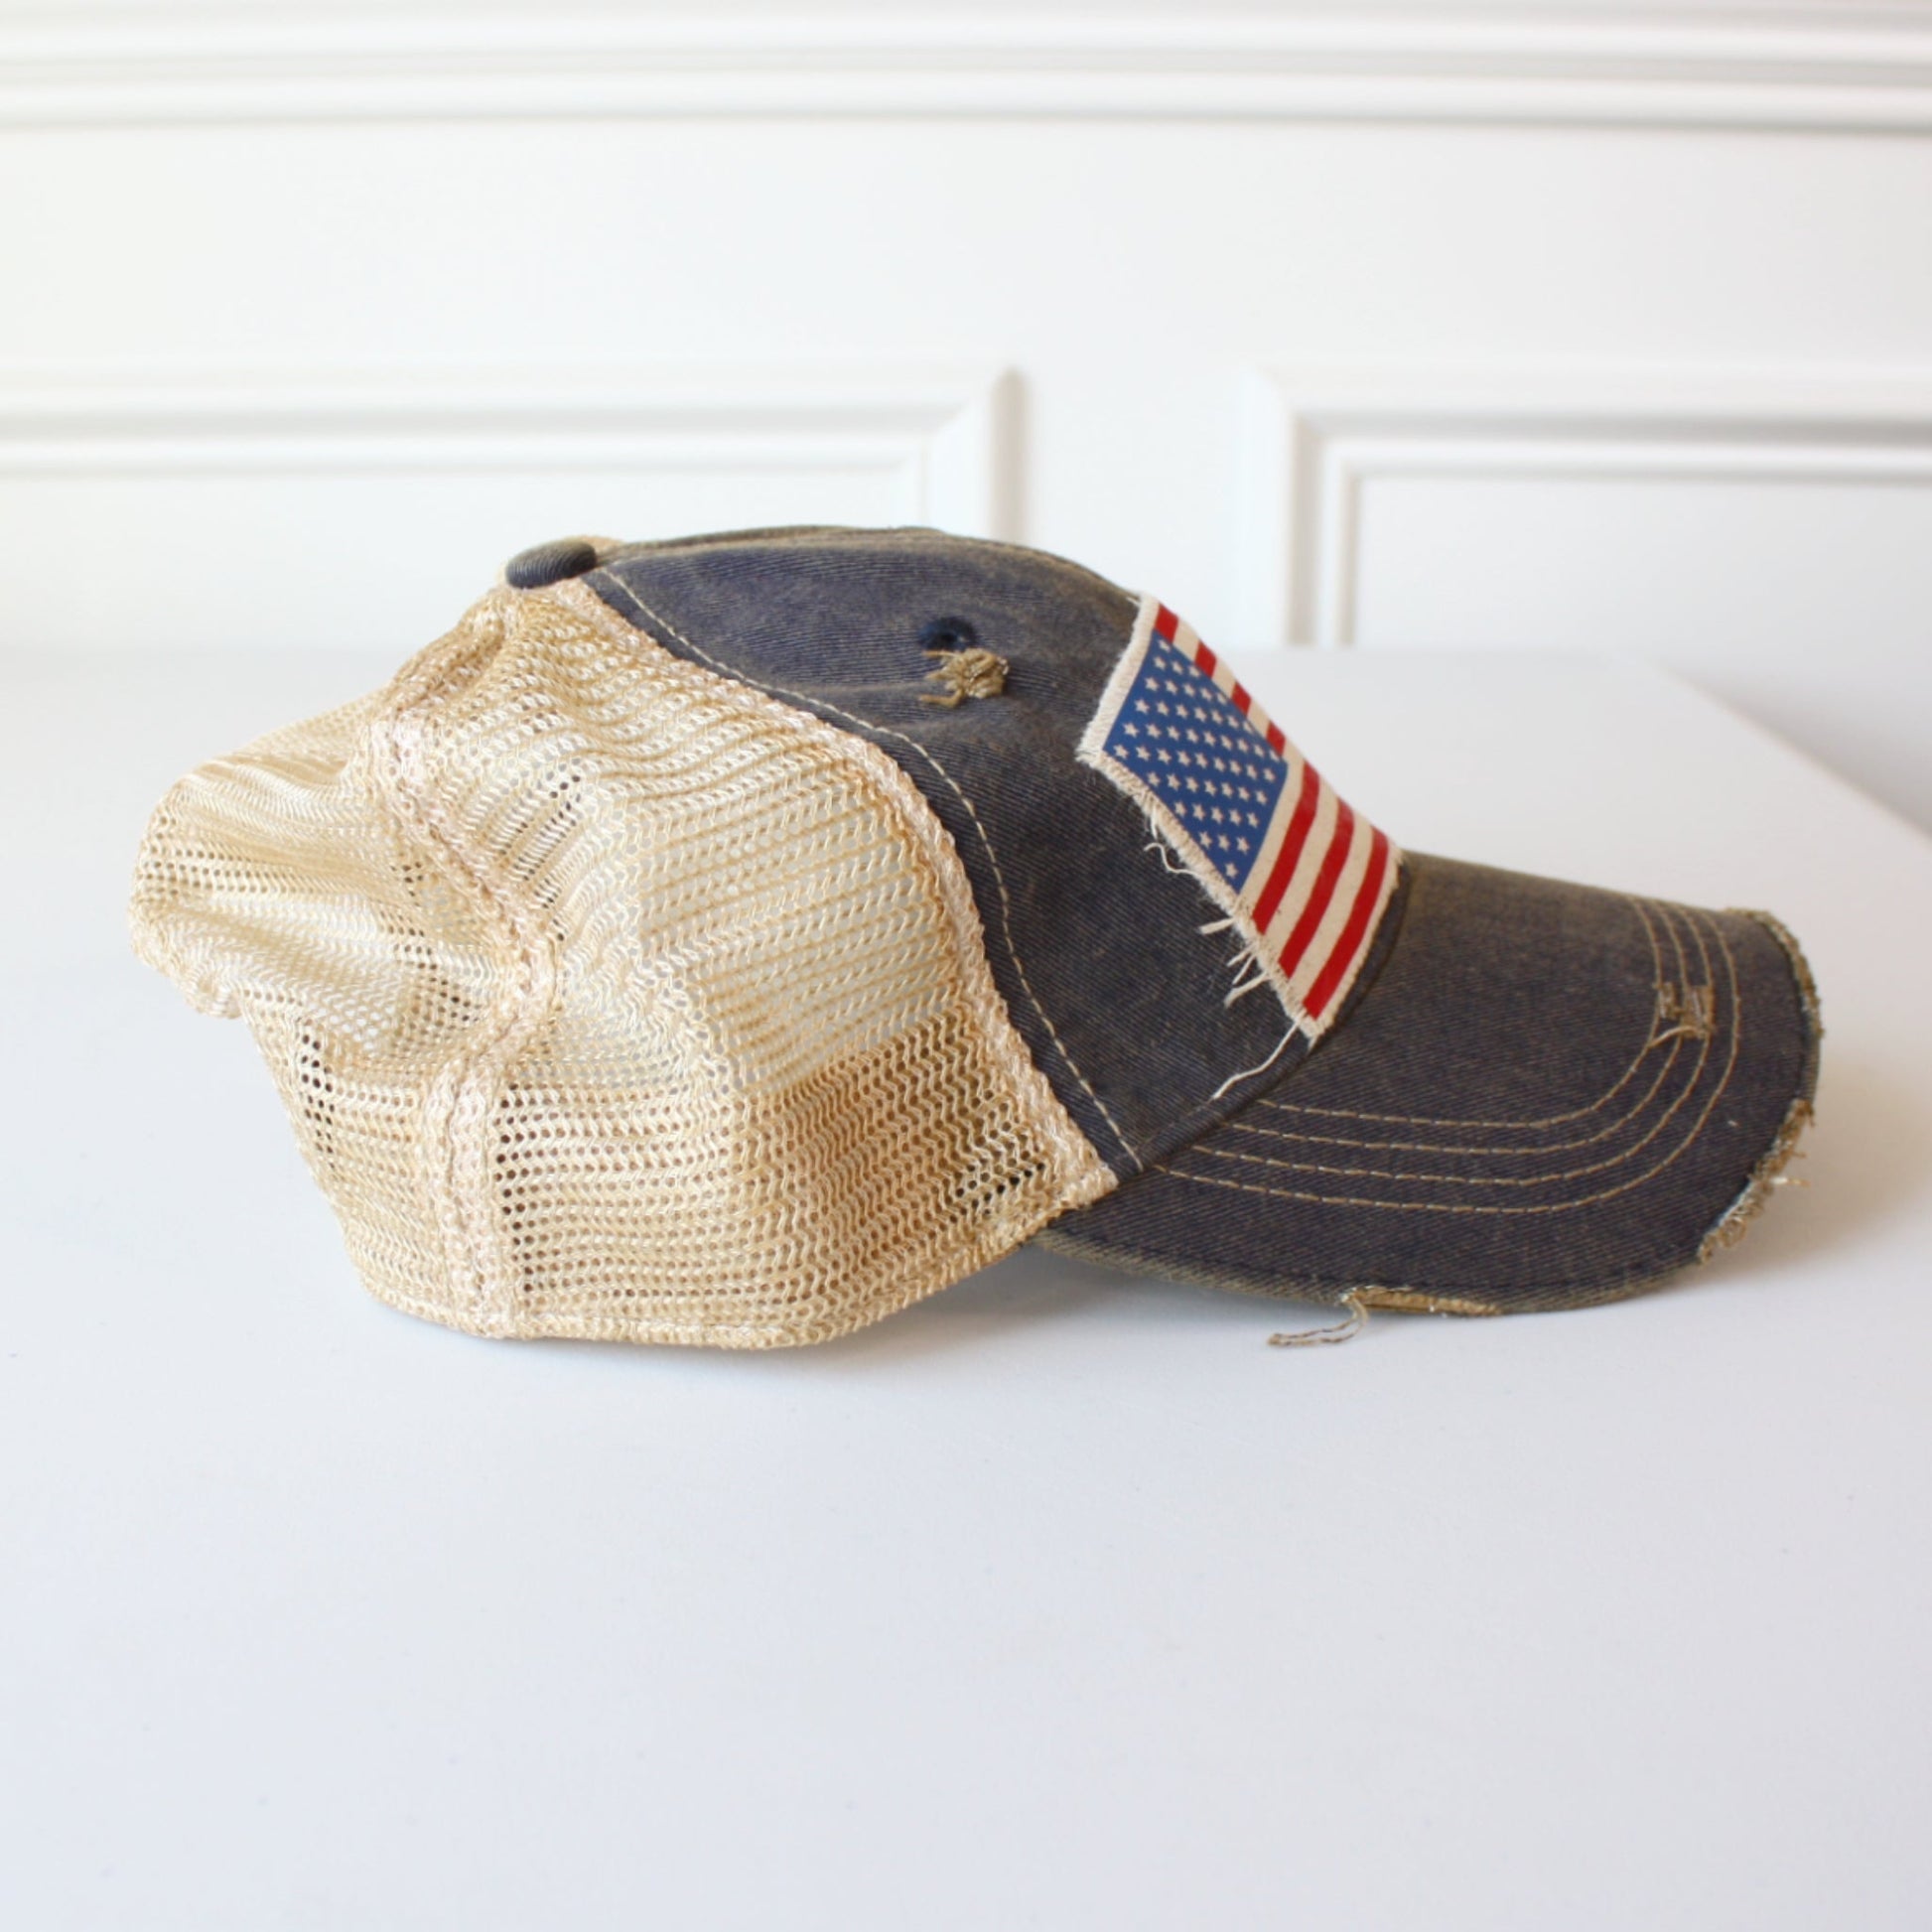 Distressed American Flag Hat - Navy Blue - Made in the USA